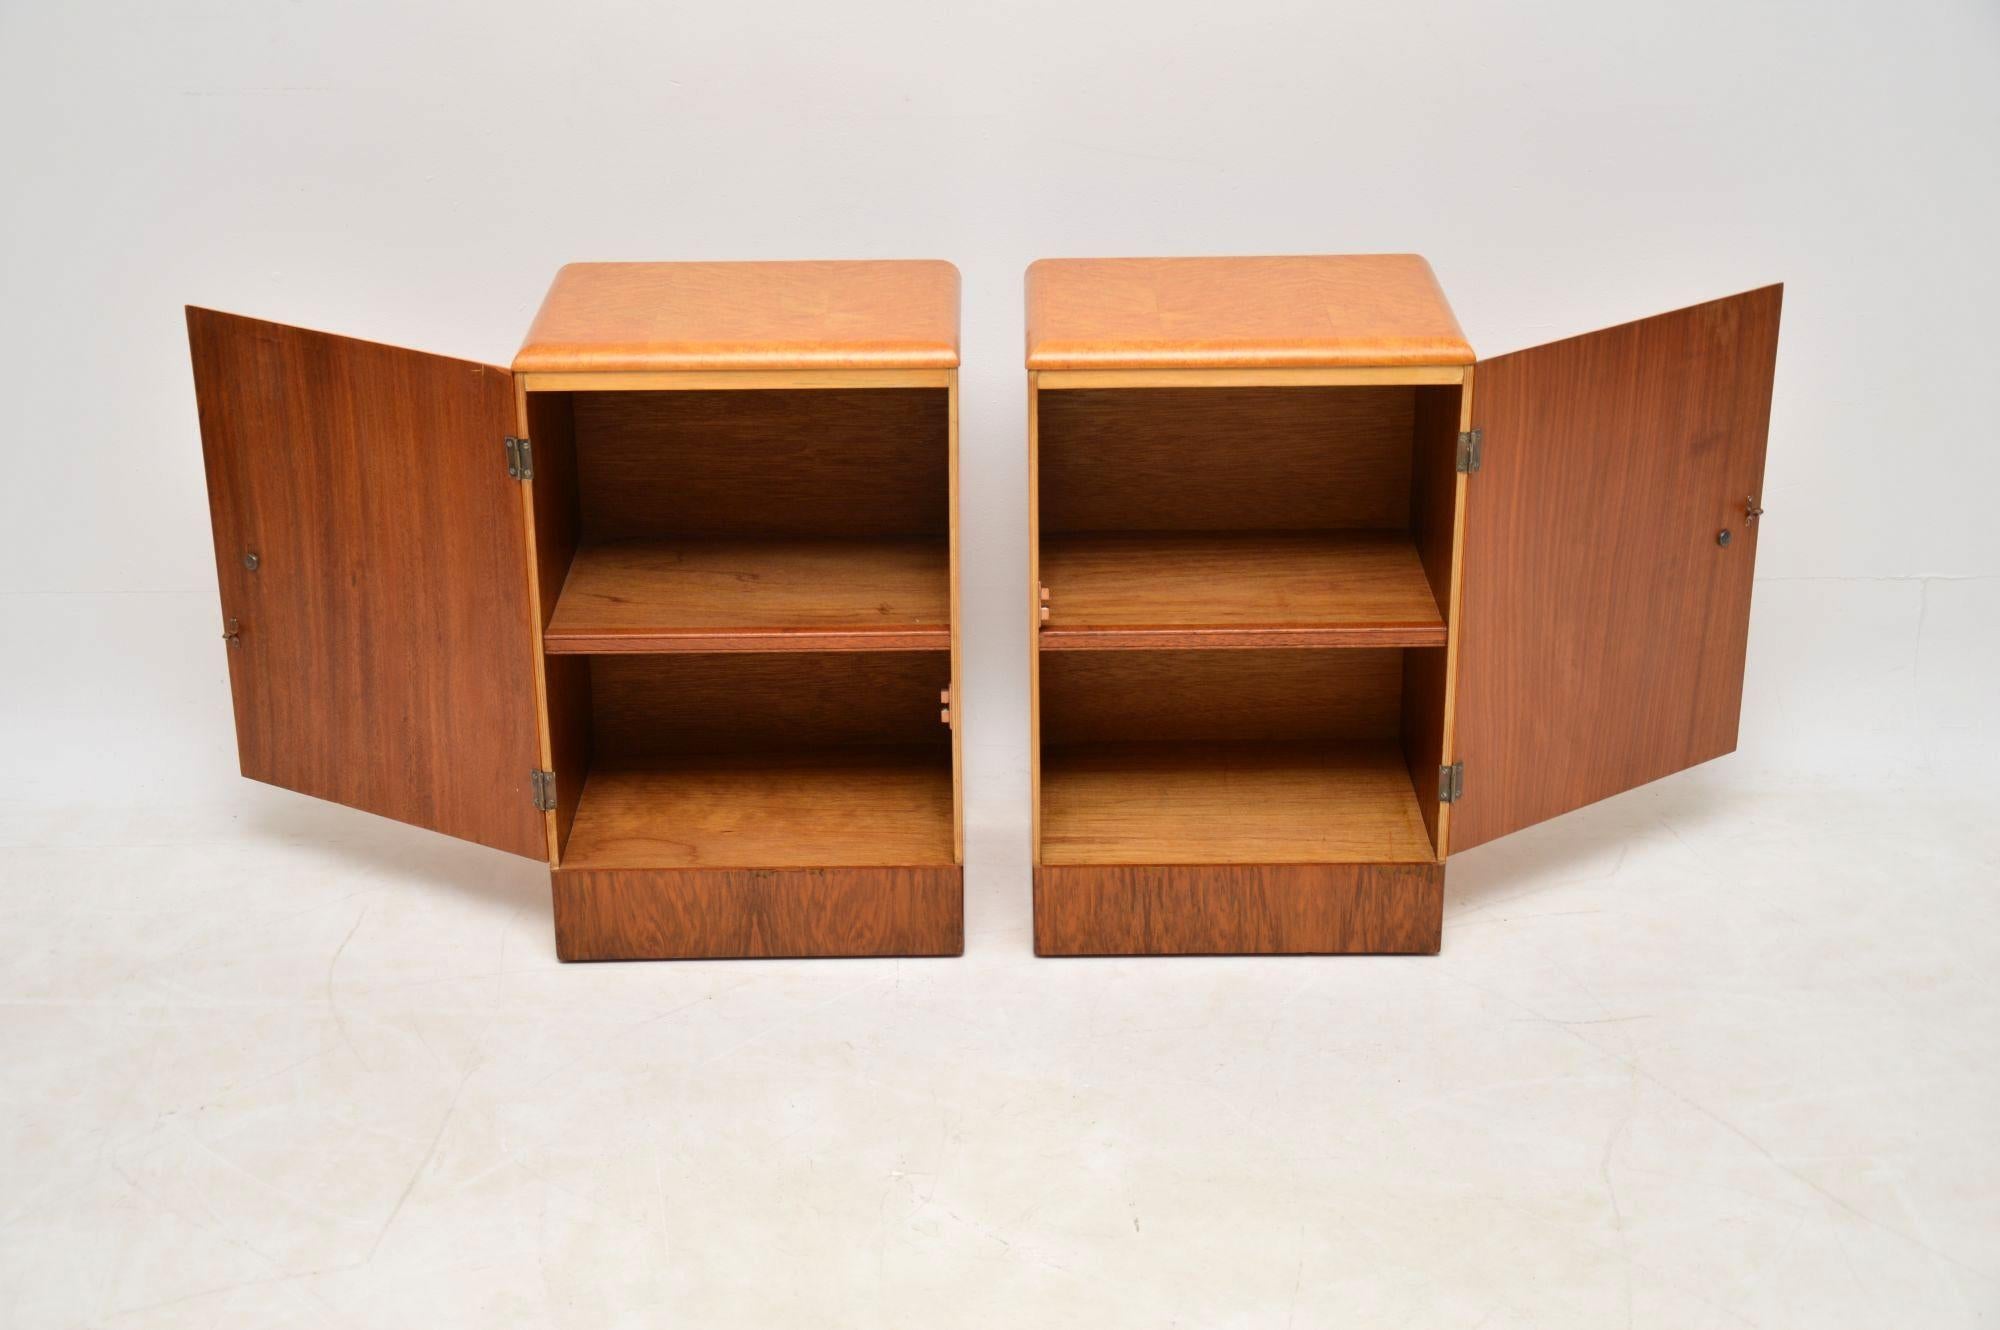 European 1930s Pair of Art Deco Maple and Walnut Bedside Cabinets